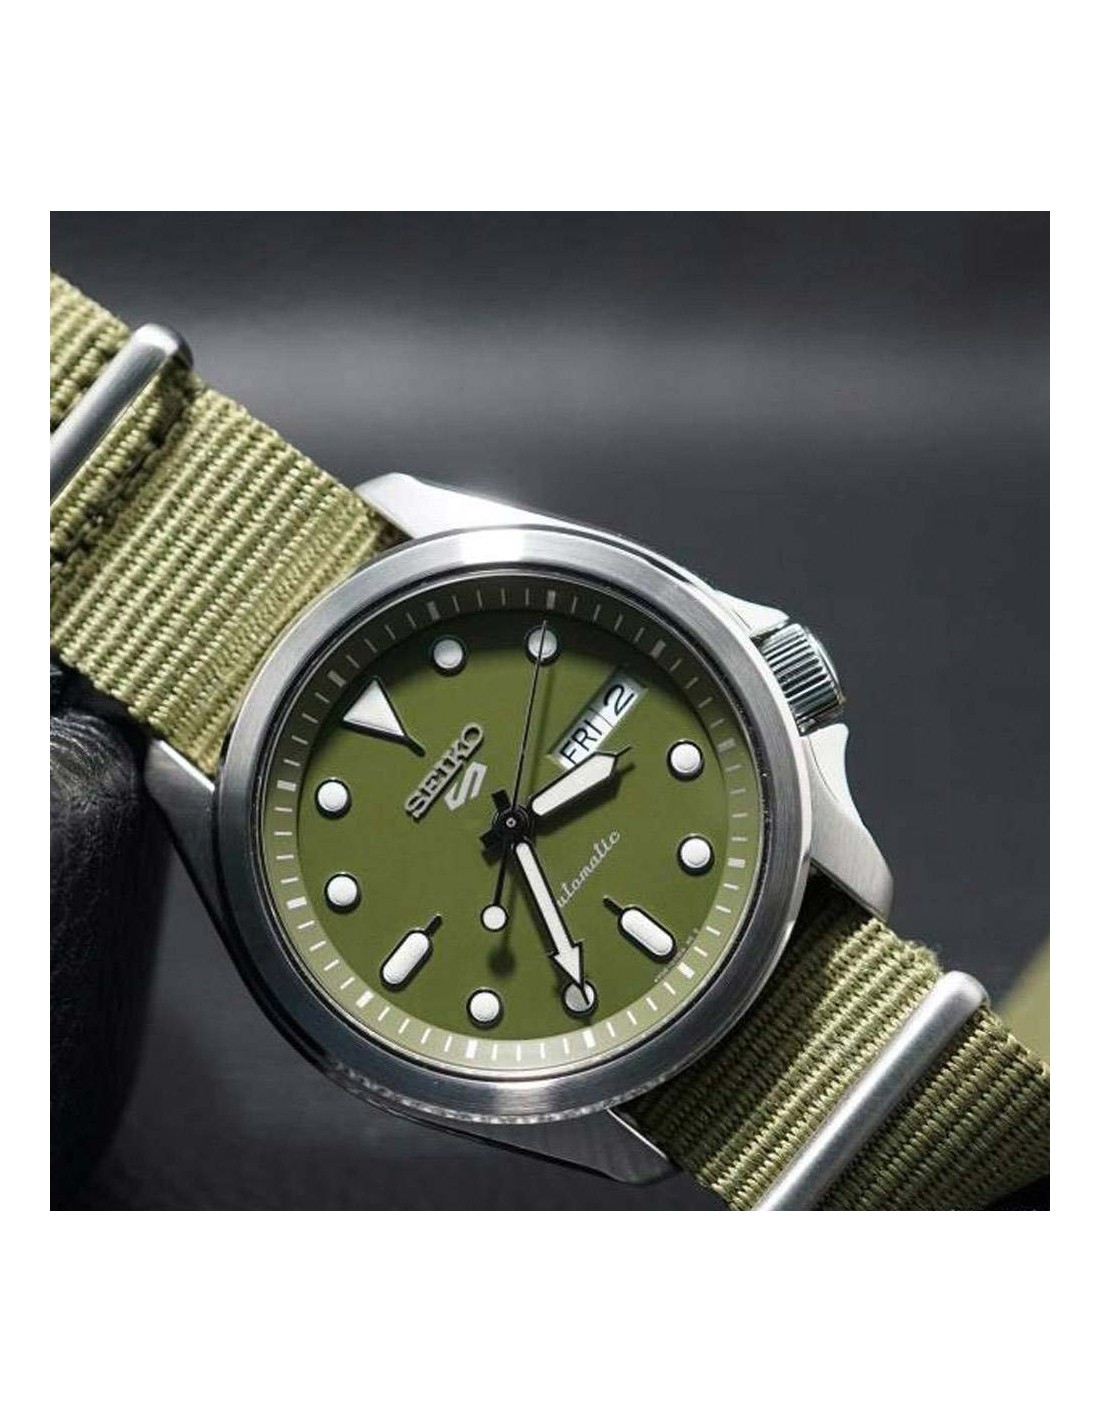 Buy Seiko SRPE65K1 Watch in India I Swiss Time House